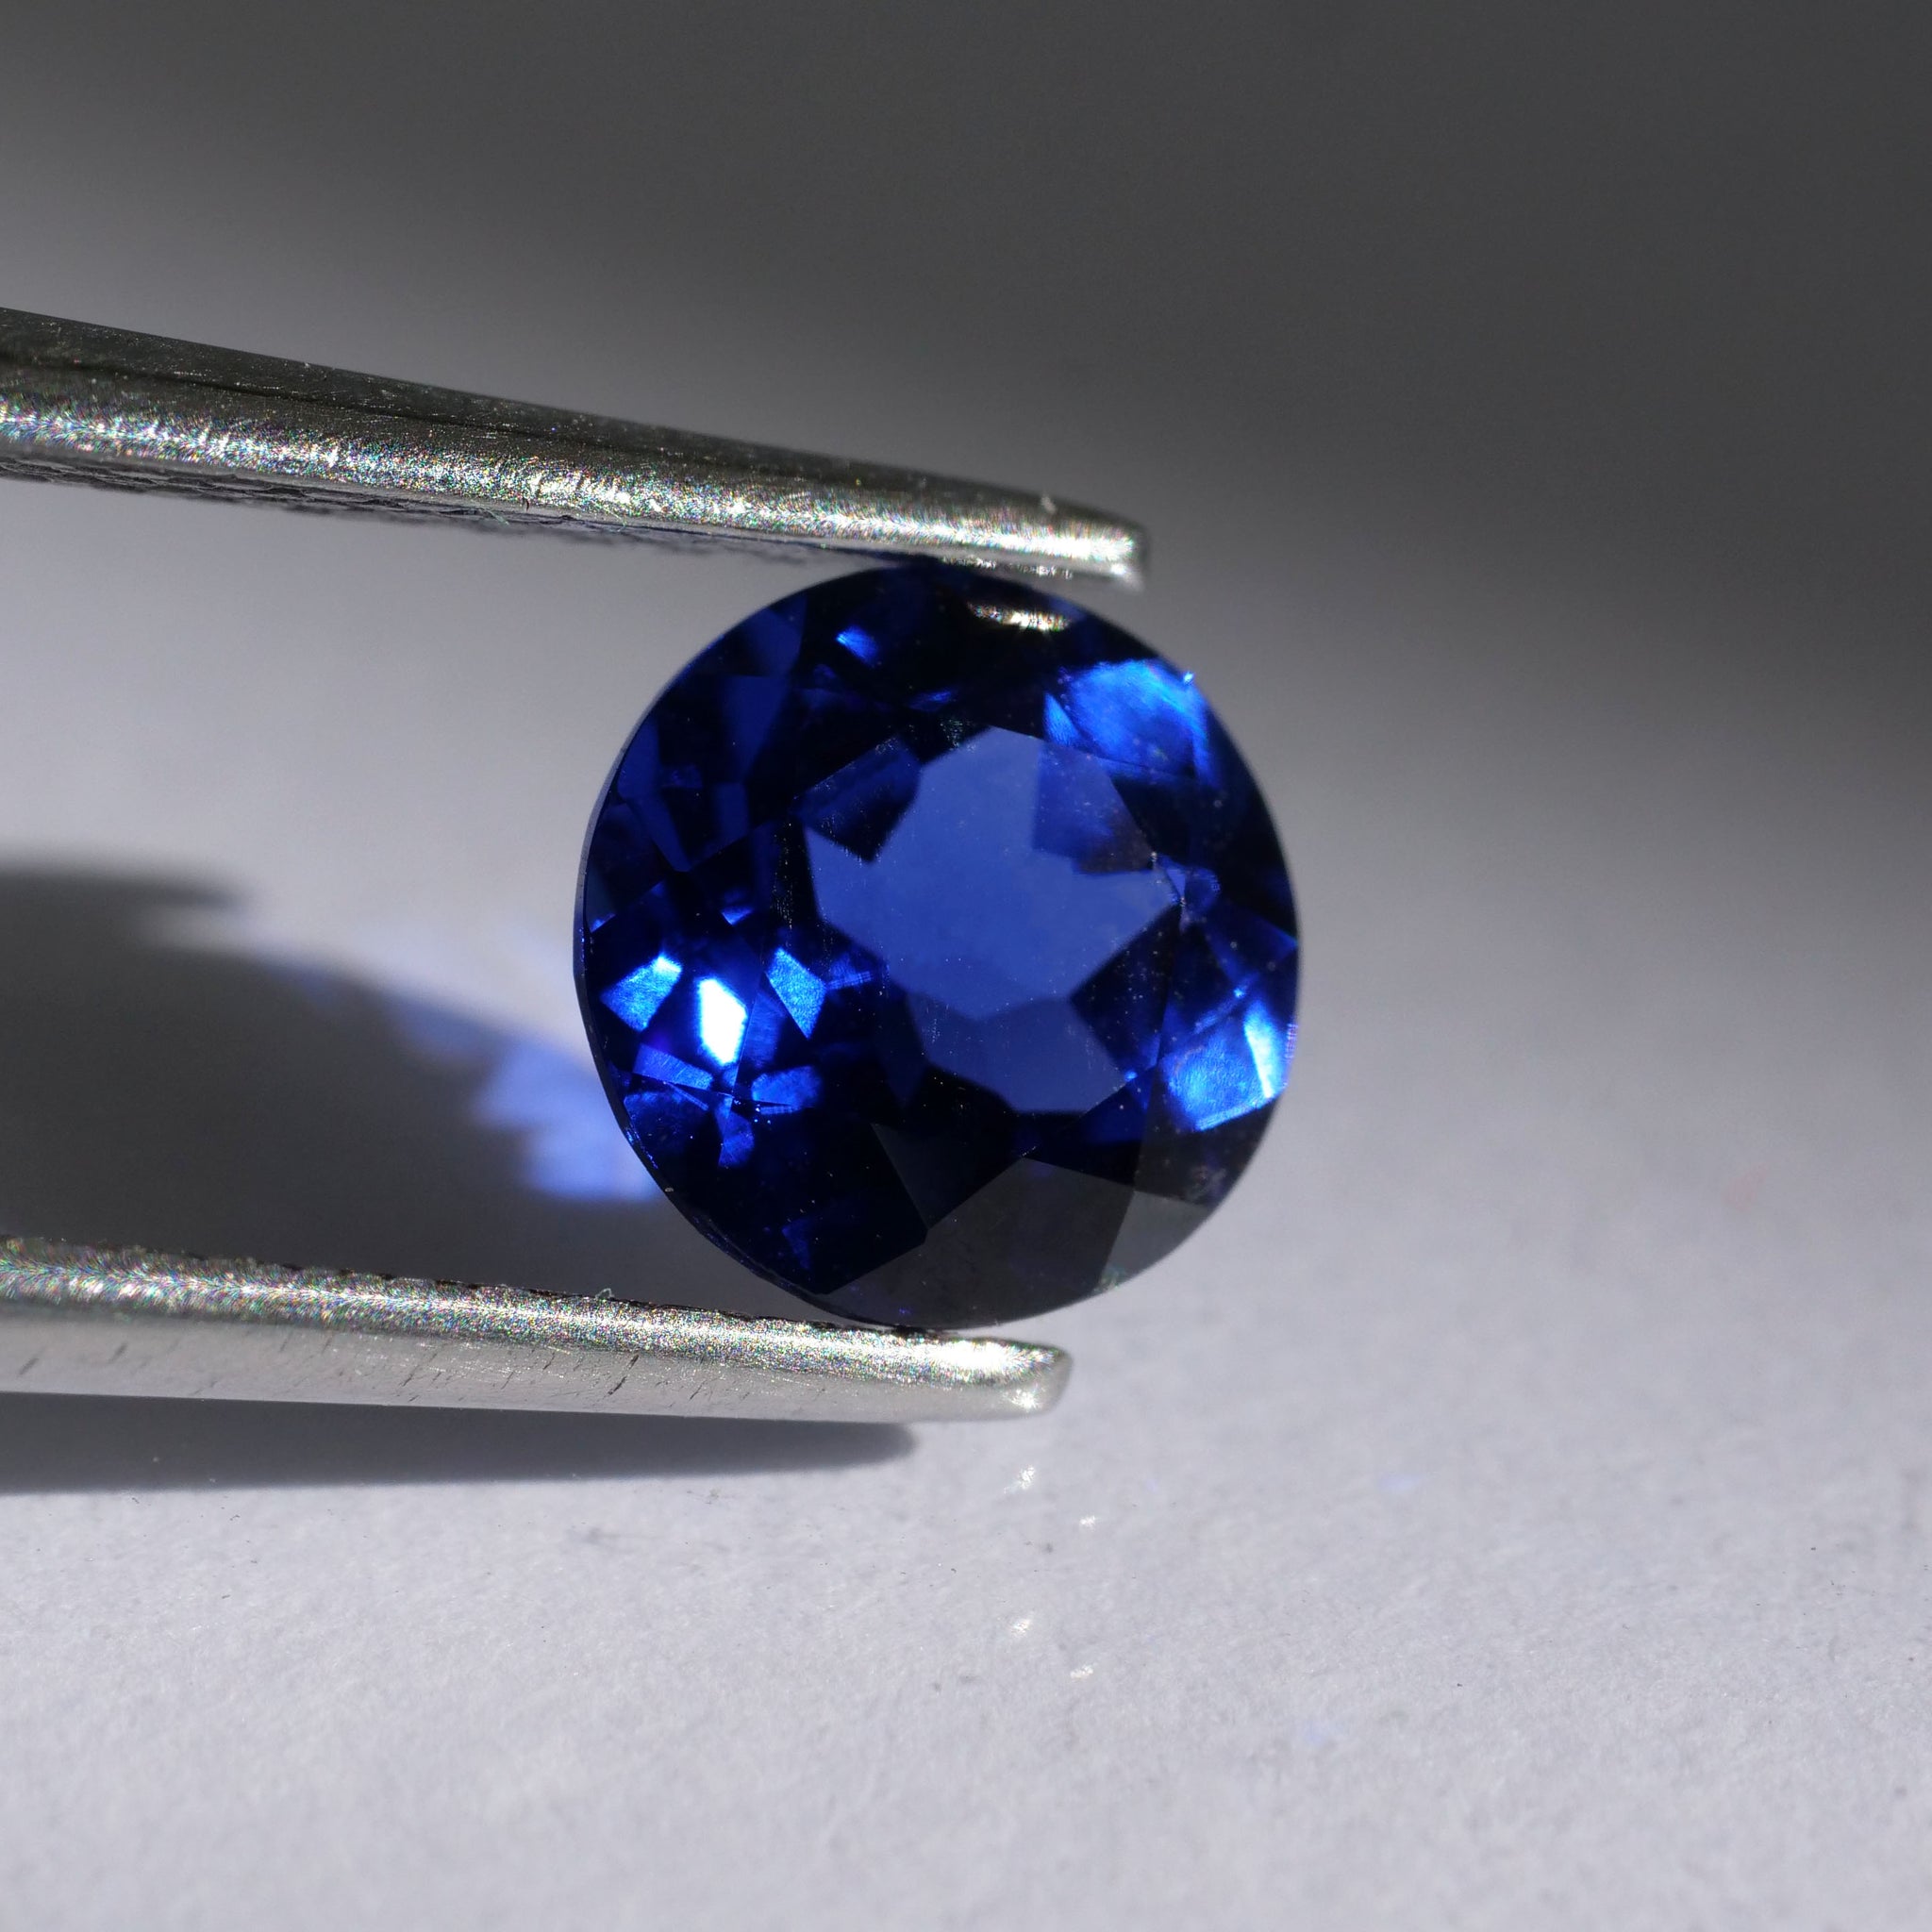 Sapphire | Royal Blue color, lab created, round cut, 5mm VS 0.5ct - Eden Garden Jewelry™